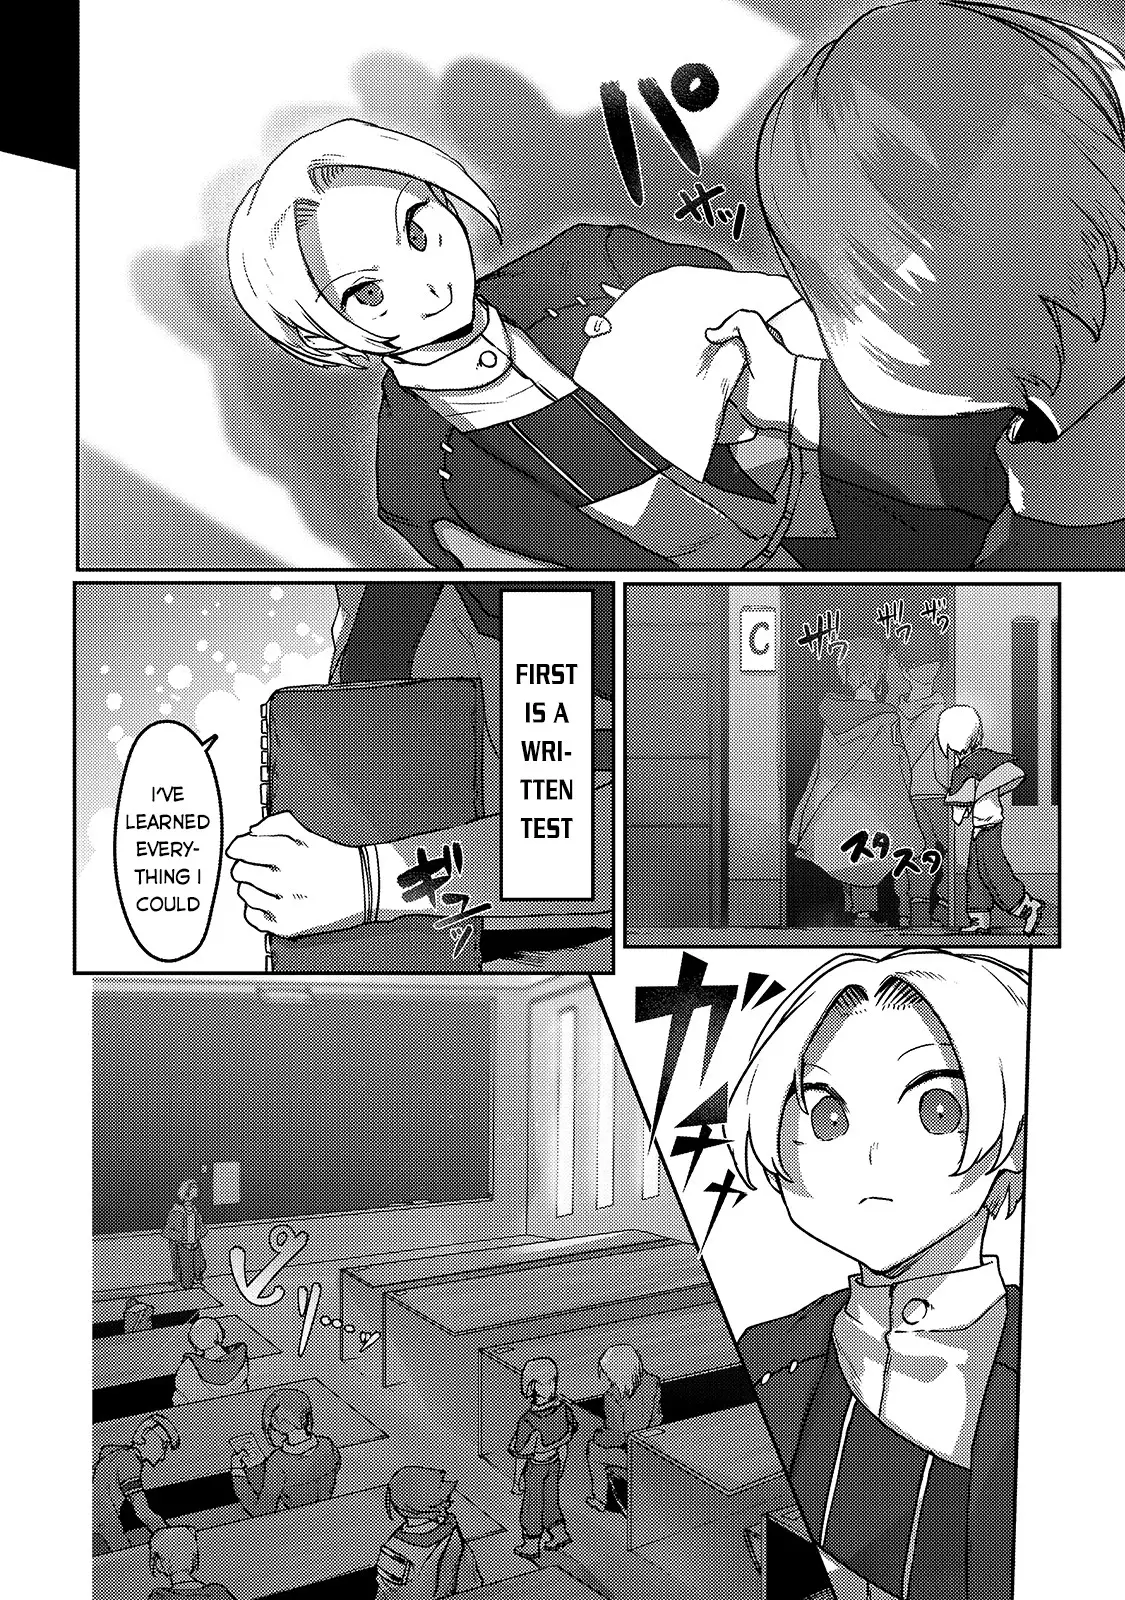 The Useless Tamer Will Turn Into The Top Unconsciously By My Previous Life Knowledge - 8 page 5